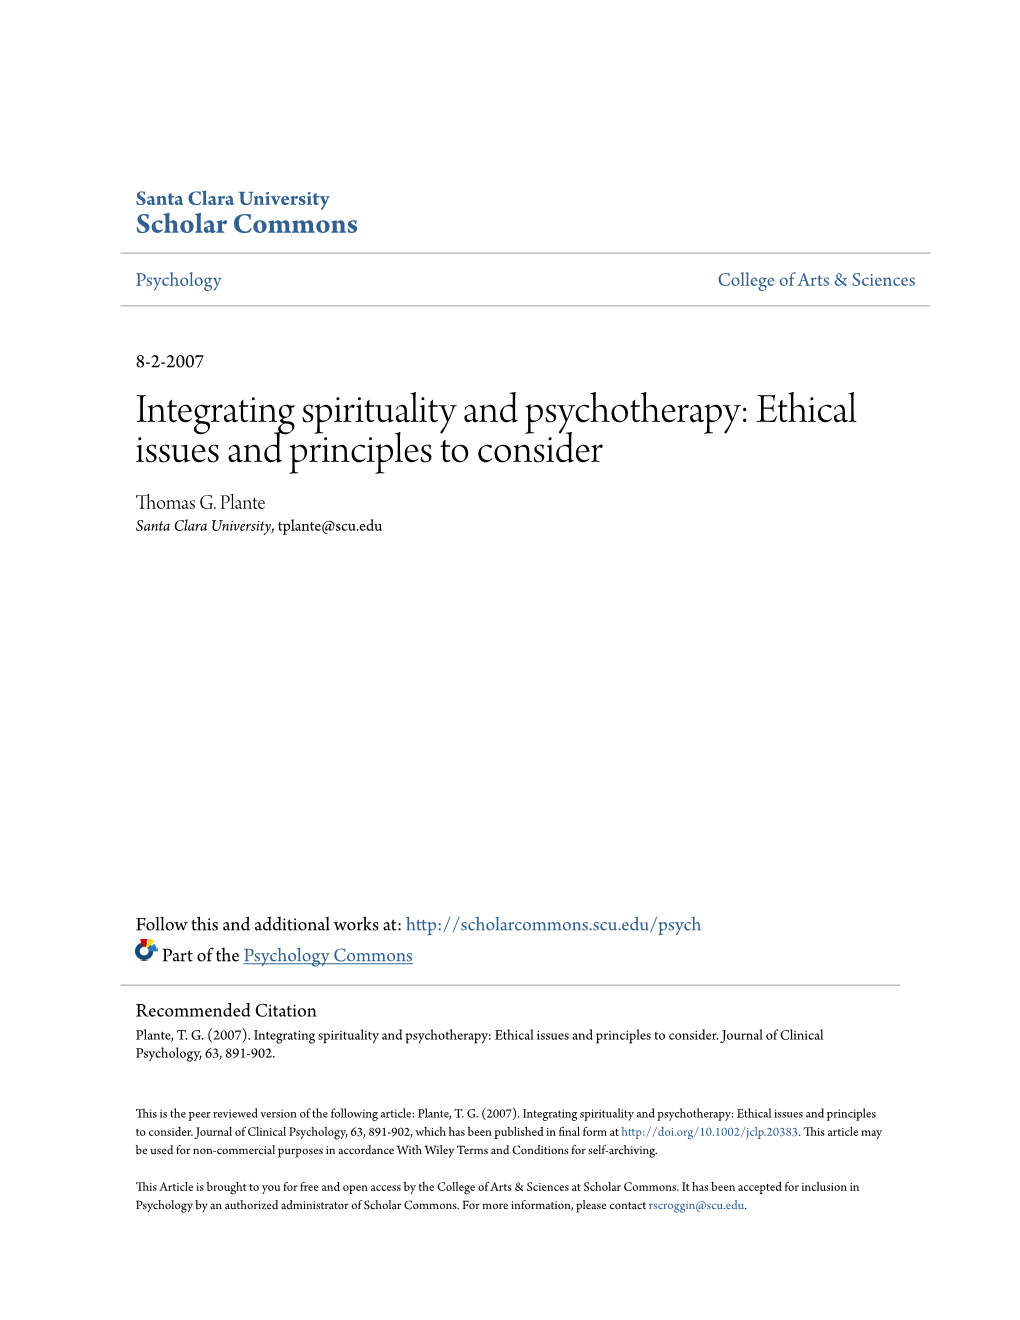 Integrating Spirituality and Psychotherapy: Ethical Issues and Principles to Consider Thomas G